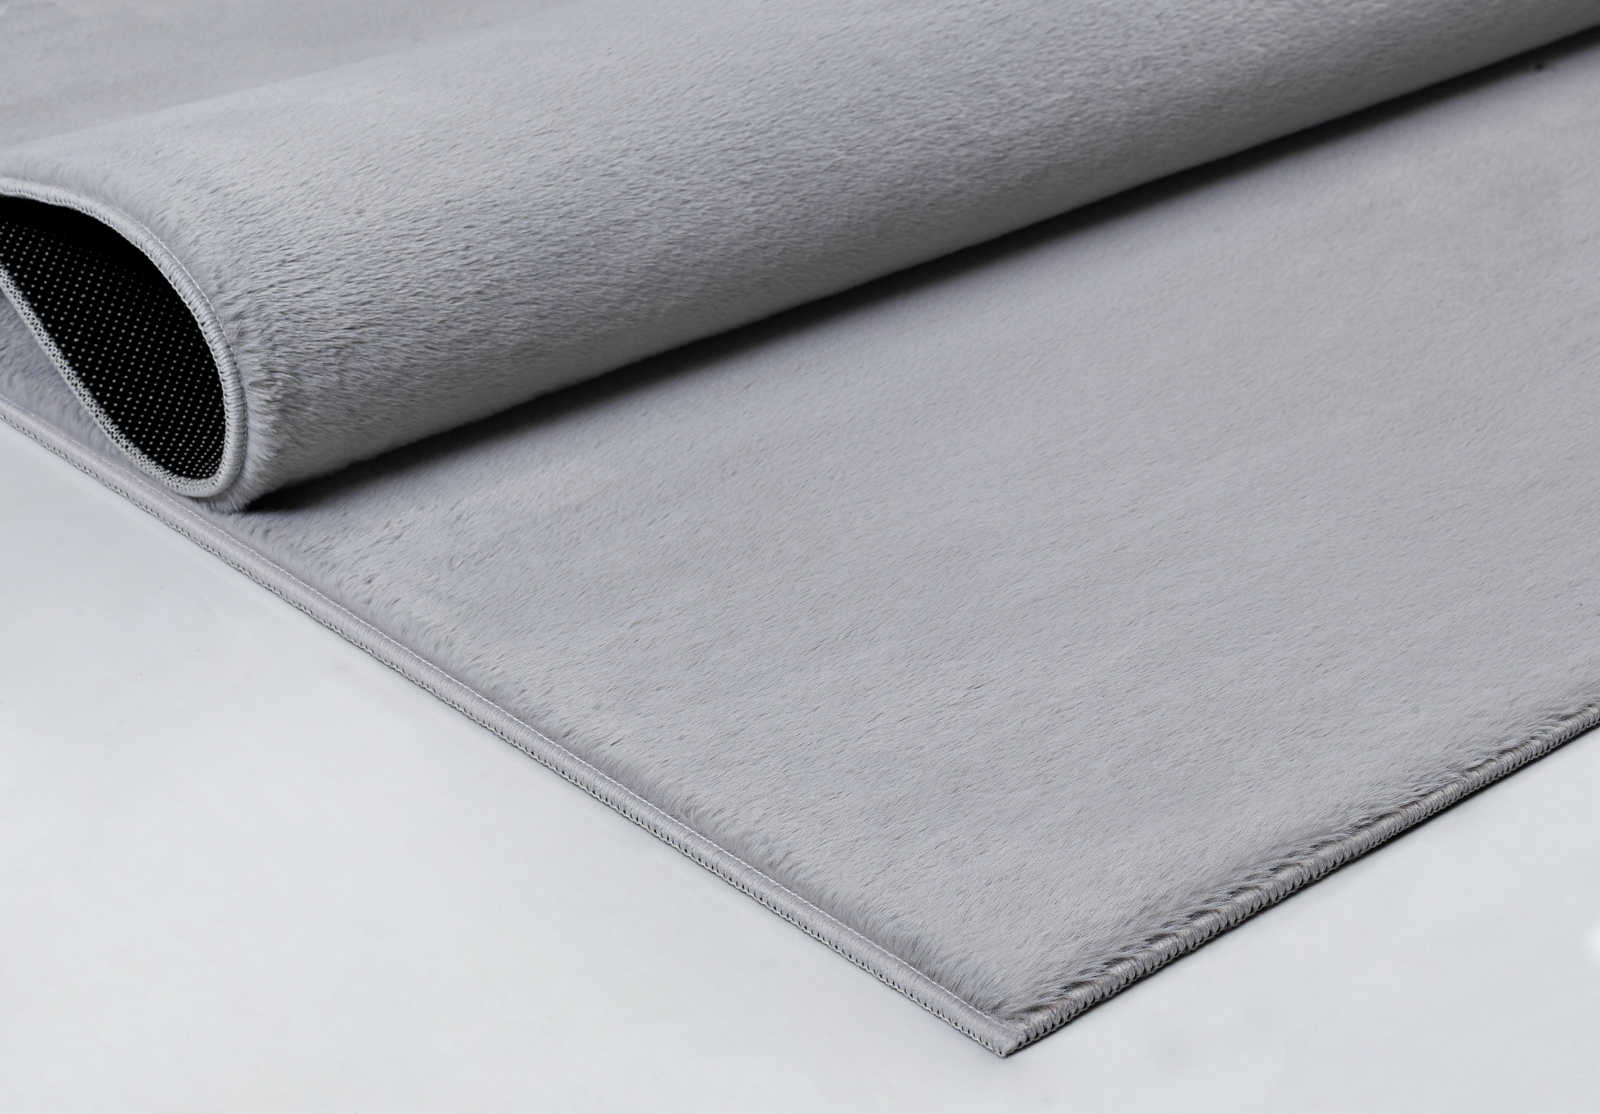             Comfortable high pile carpet in soft grey - 200 x 140 cm
        